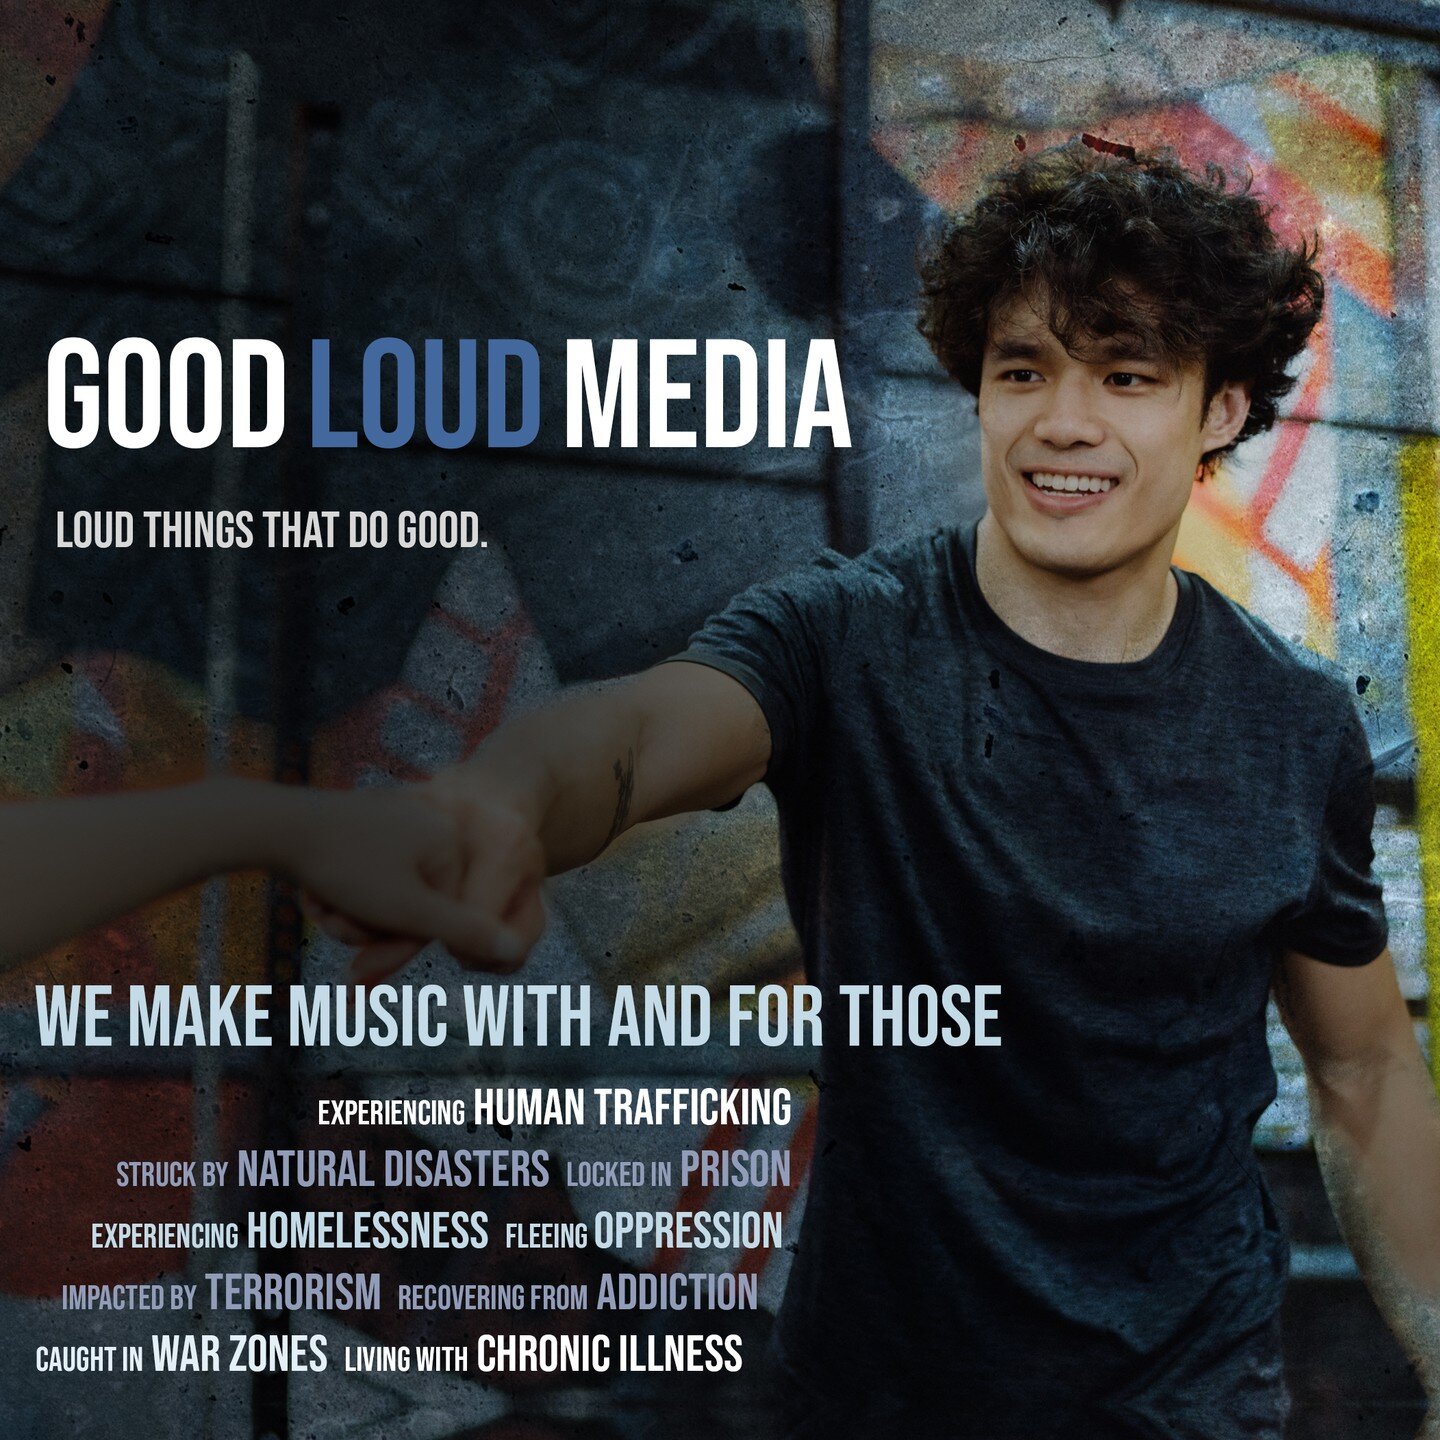 On this Giving Tuesday, all of us at Good Loud Media want to thank you for your generous support. Thank you for making this life-changing, life-saving assistance possible!

To make a gift, visit: https://www.goodloudmedia.org/donate